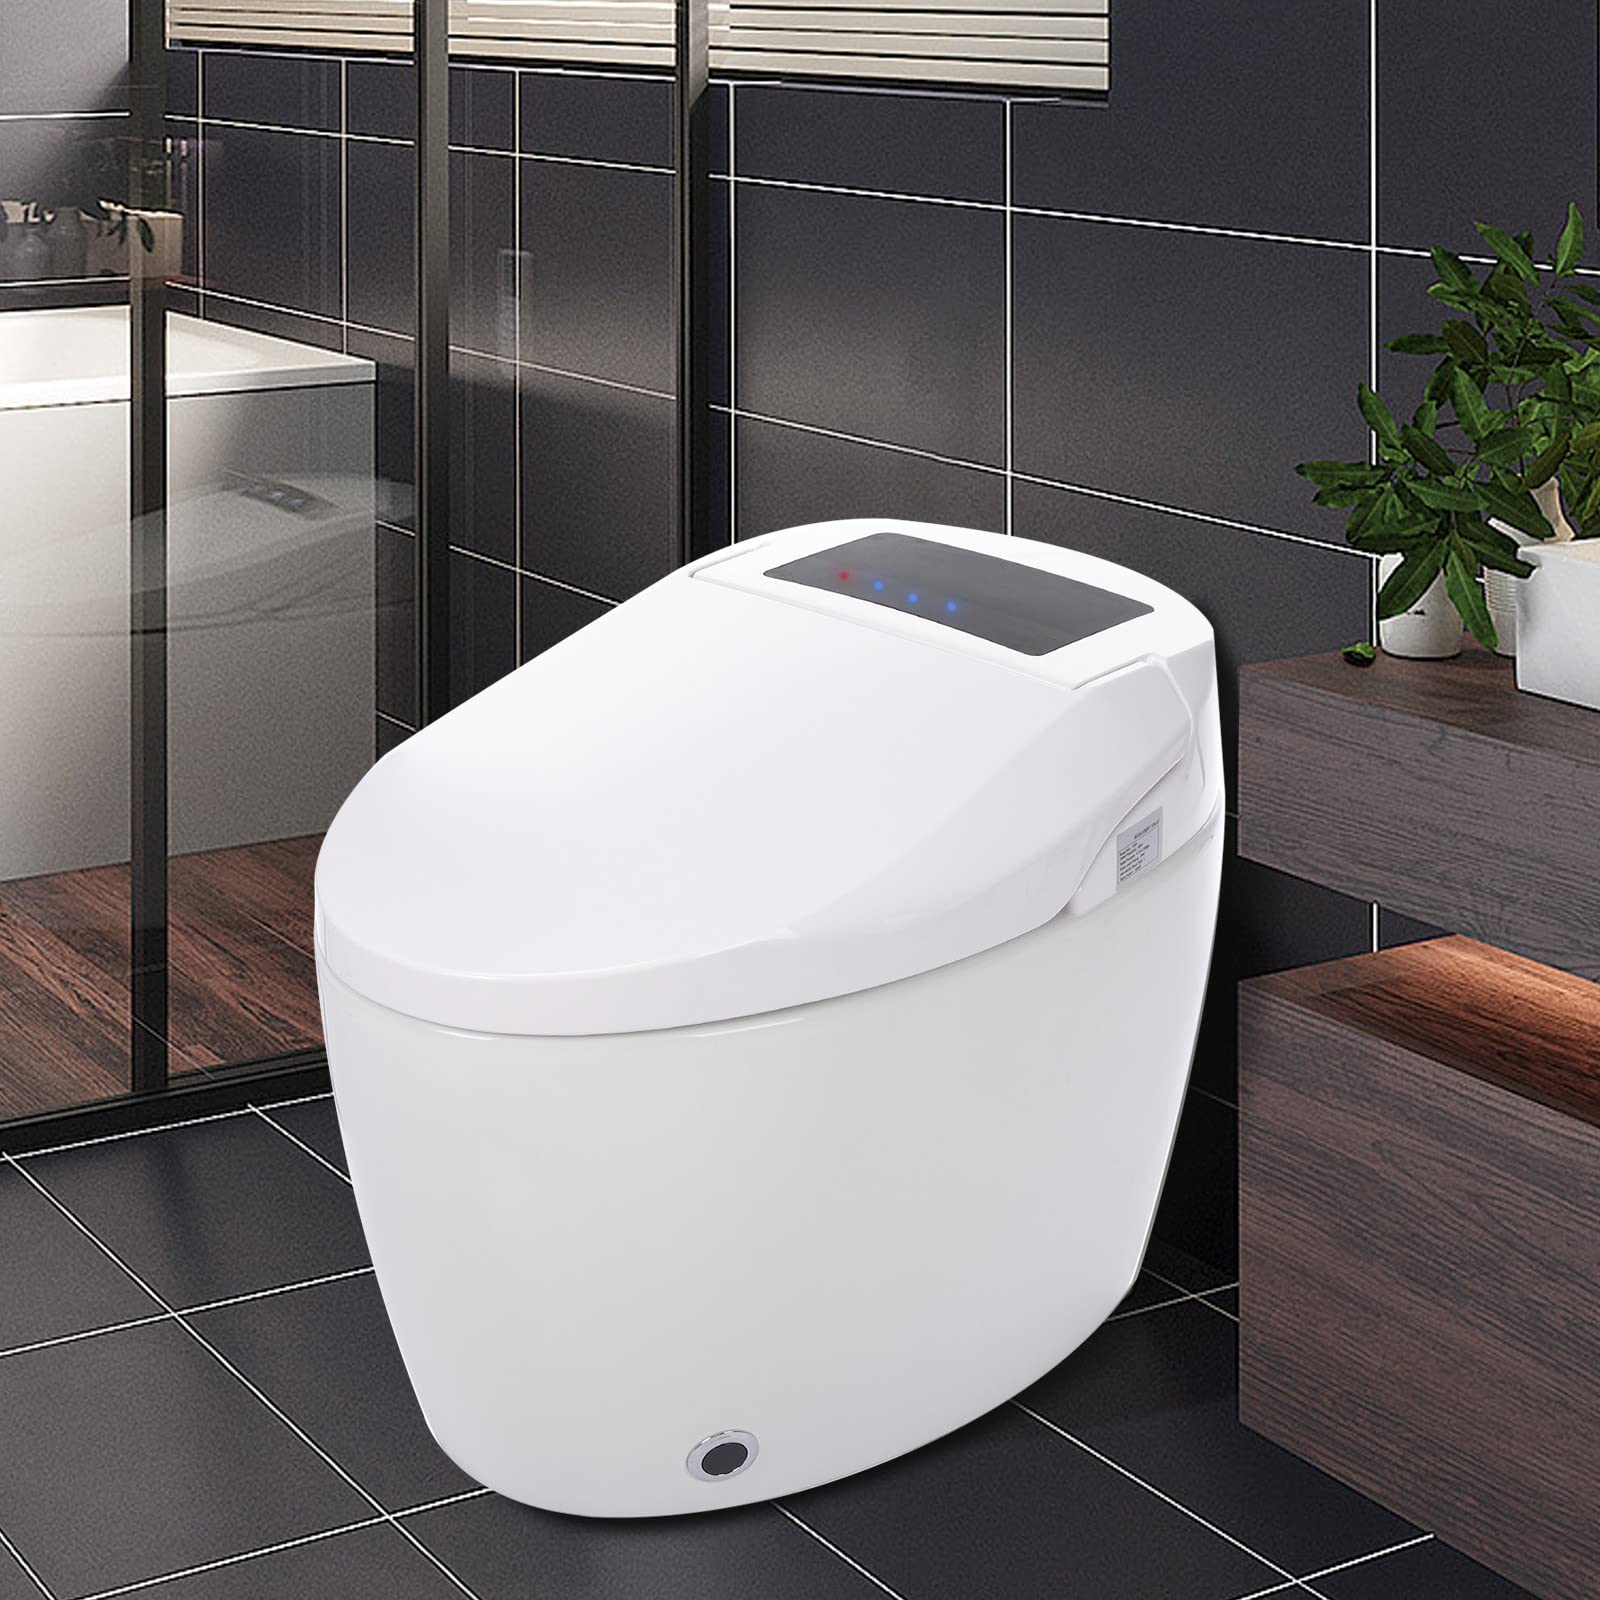 Smart Toilet One Piece Toilet with Heated Seat, Modern Smart Bidet Toilet Auto Flush, Auto Open/Close, Warm Water and Dry, Multi Function Remote Control